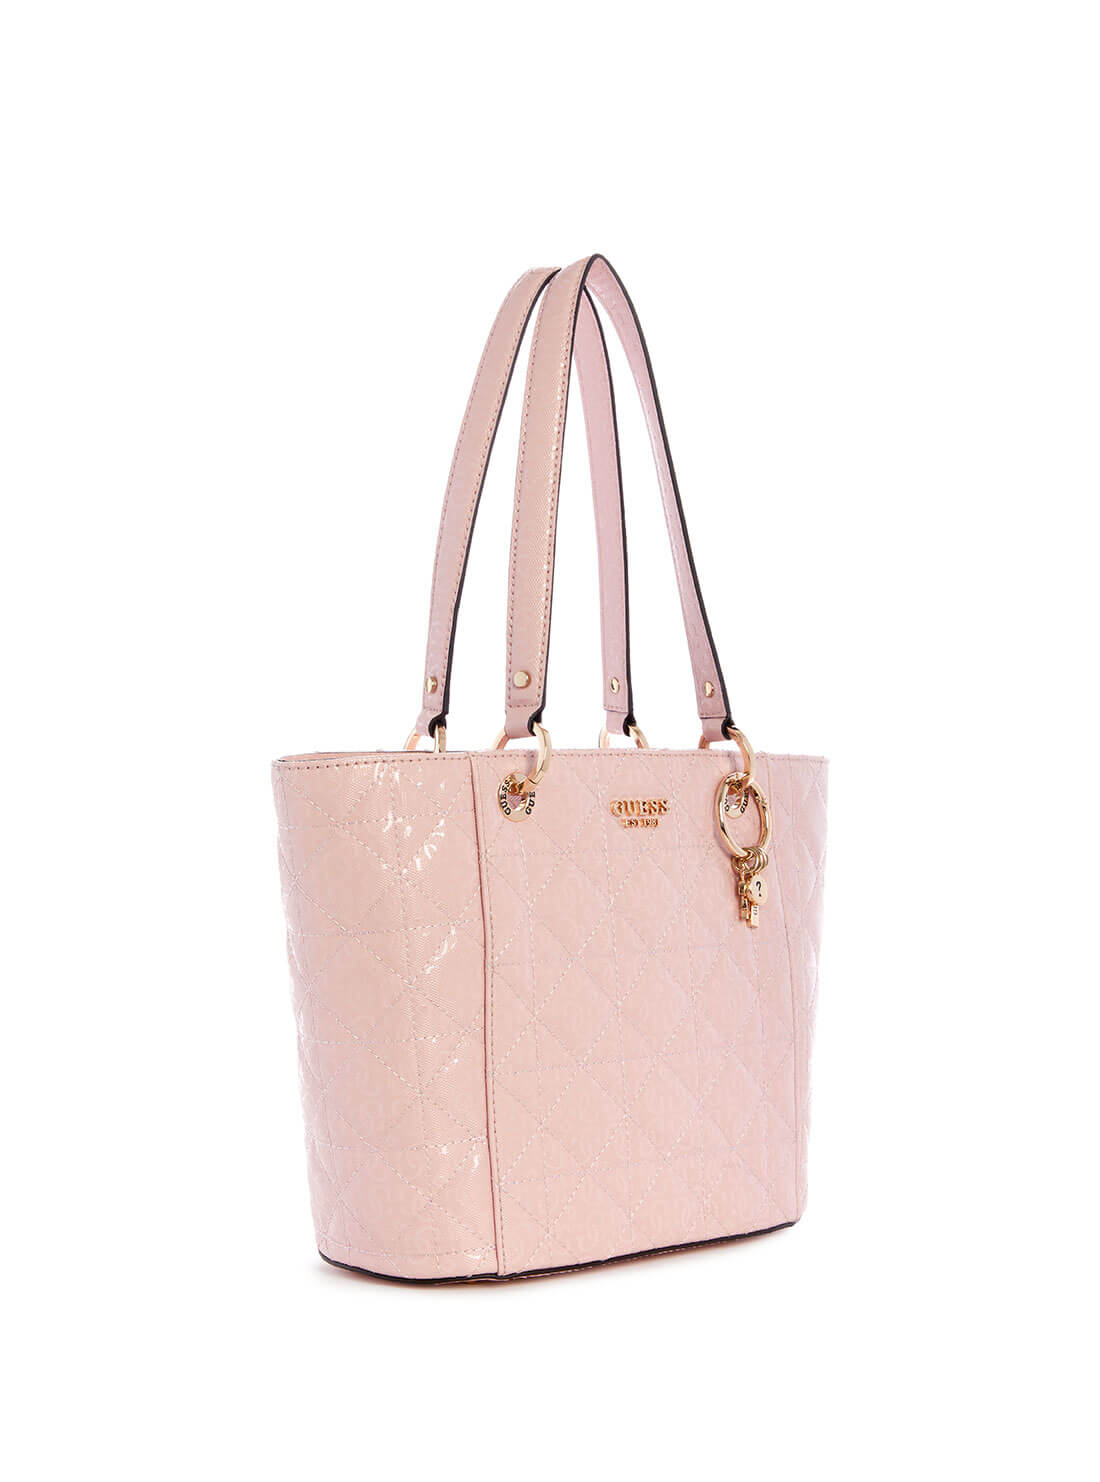 GUESS Womens Pink Noelle Elite Tote Bag GS787922 Side View